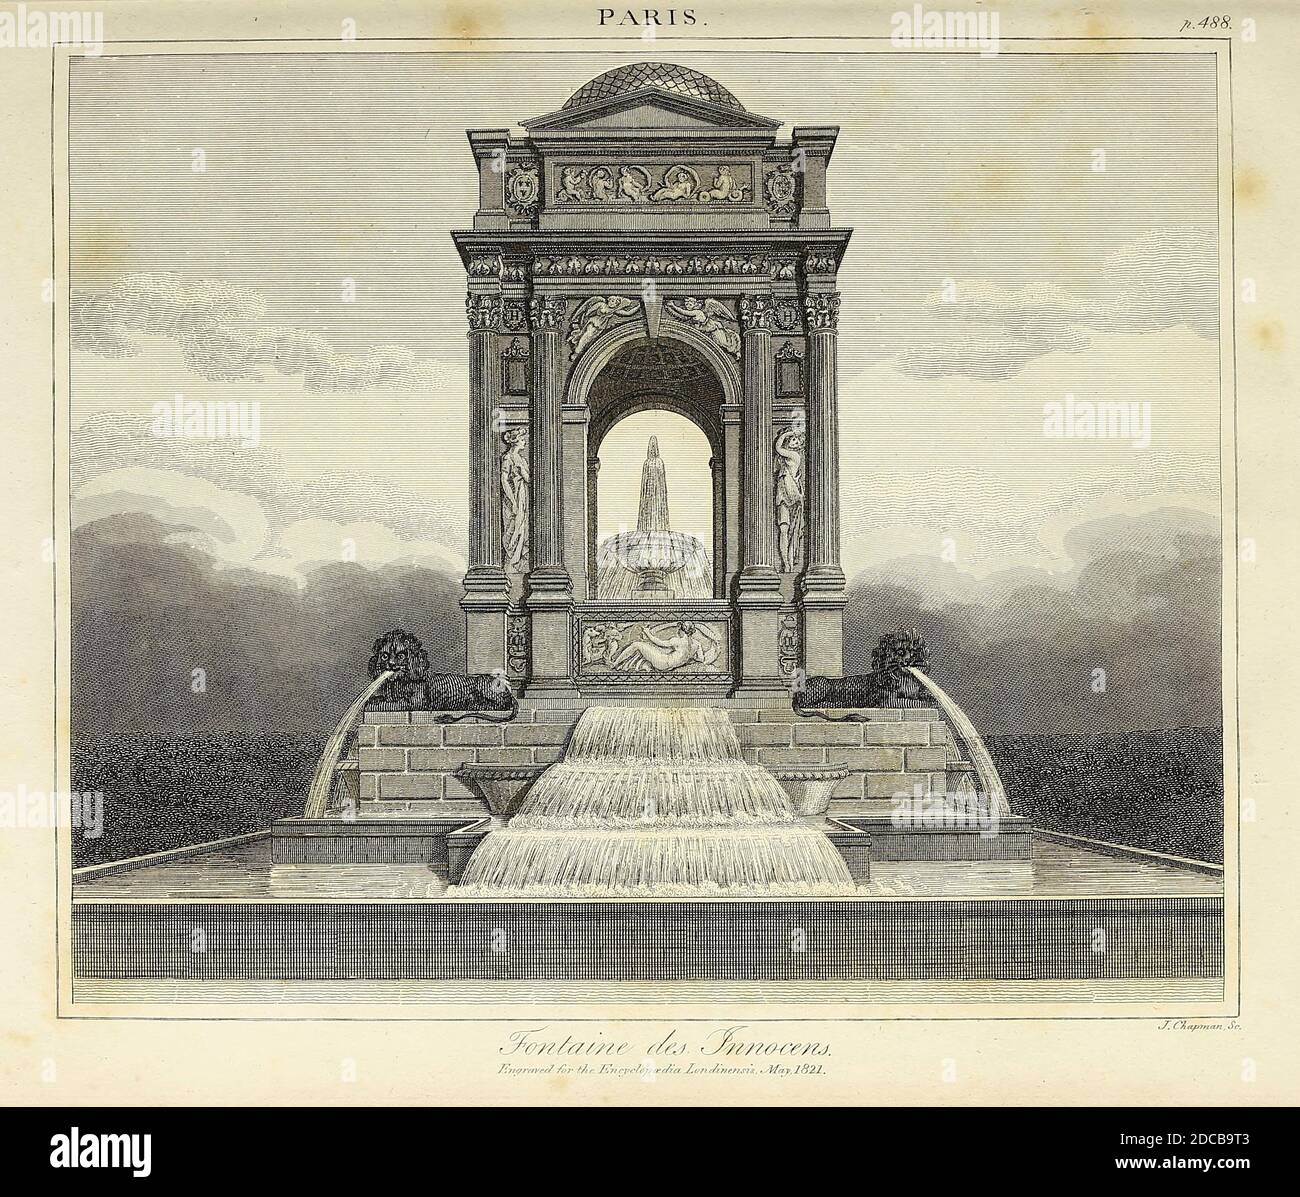 19th Century illustration of the Fountaine des Innocens [Fontaine des Innocents], Paris, France The Fontaine des Innocents is a monumental public fountain located on the place Joachim-du-Bellay in the Les Halles district in the 1st arrondissement of Paris, France. Originally called the Fountain of the Nymphs, it was constructed between 1547 and 1550 by architect Pierre Lescot and sculptor Jean Goujon in the new style of the French Renaissance. It is the oldest monumental fountain in Paris. Copperplate engraving From the Encyclopaedia Londinensis or, Universal dictionary of arts, sciences, and Stock Photo